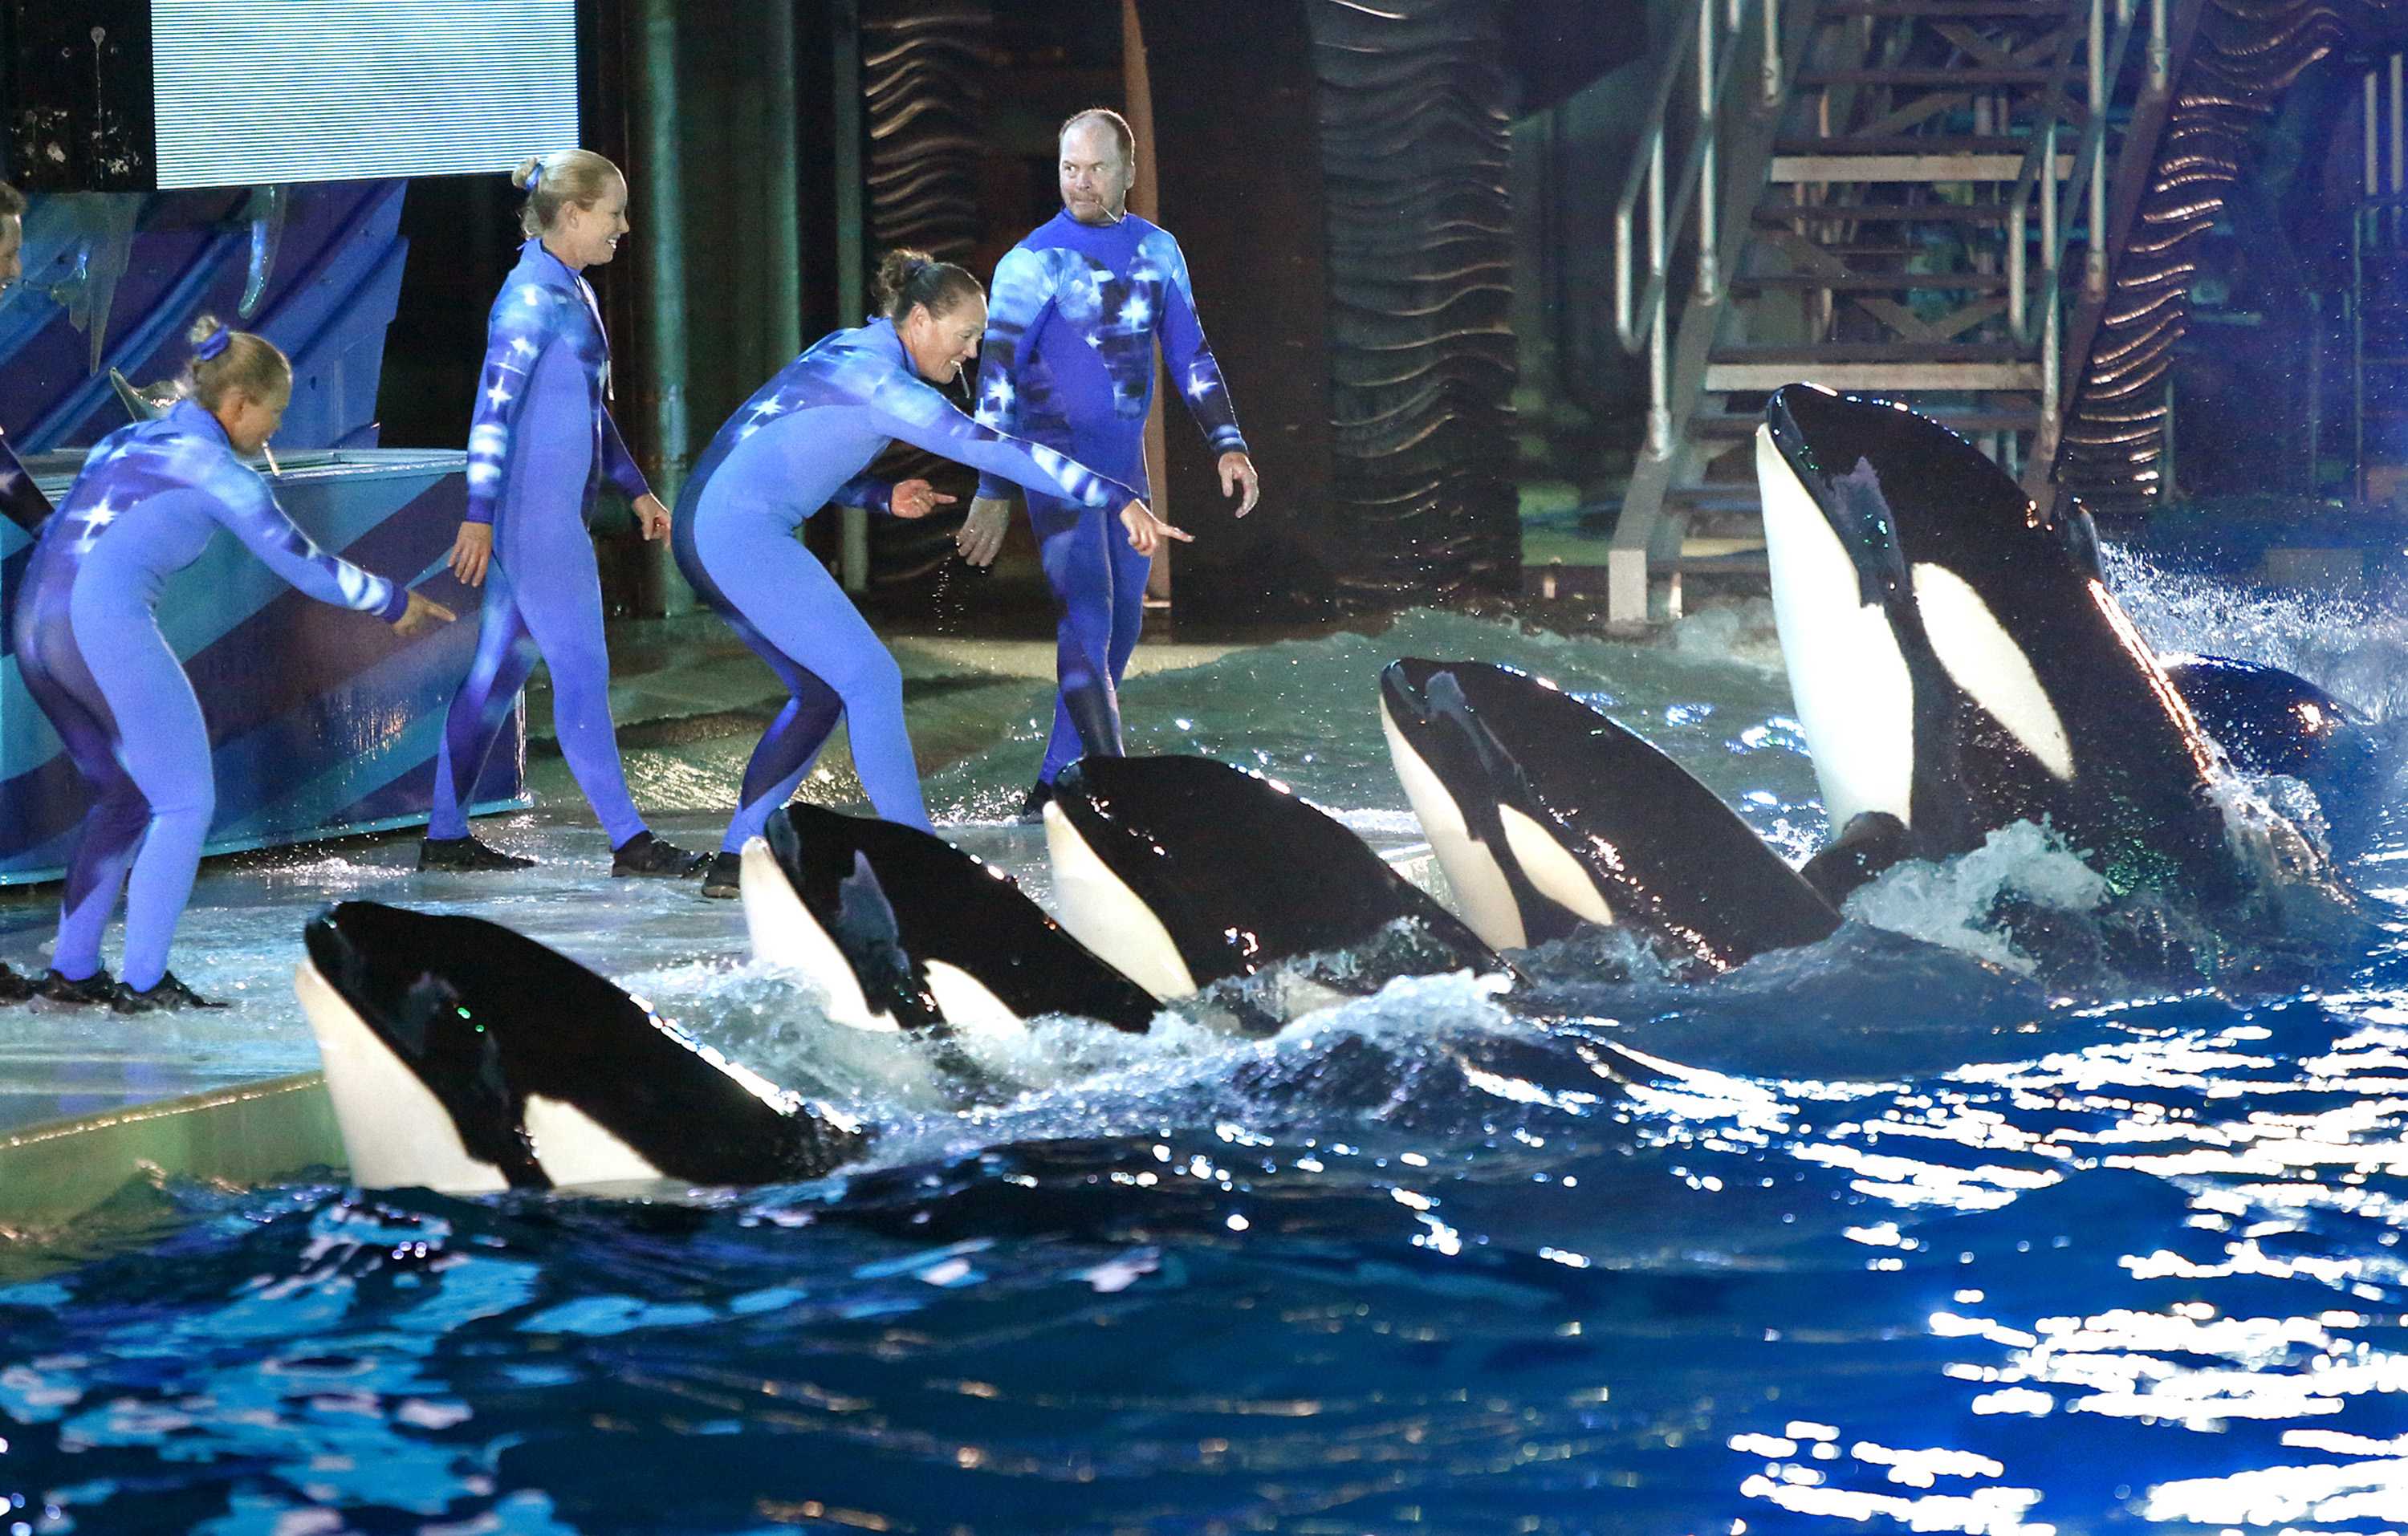 During a night performance at Shamu Stadium, trainers direct killer whales on March 20, 2014 at SeaWorld San Diego. (Don Bartletti/Los Angeles Times/TNS/MCT)